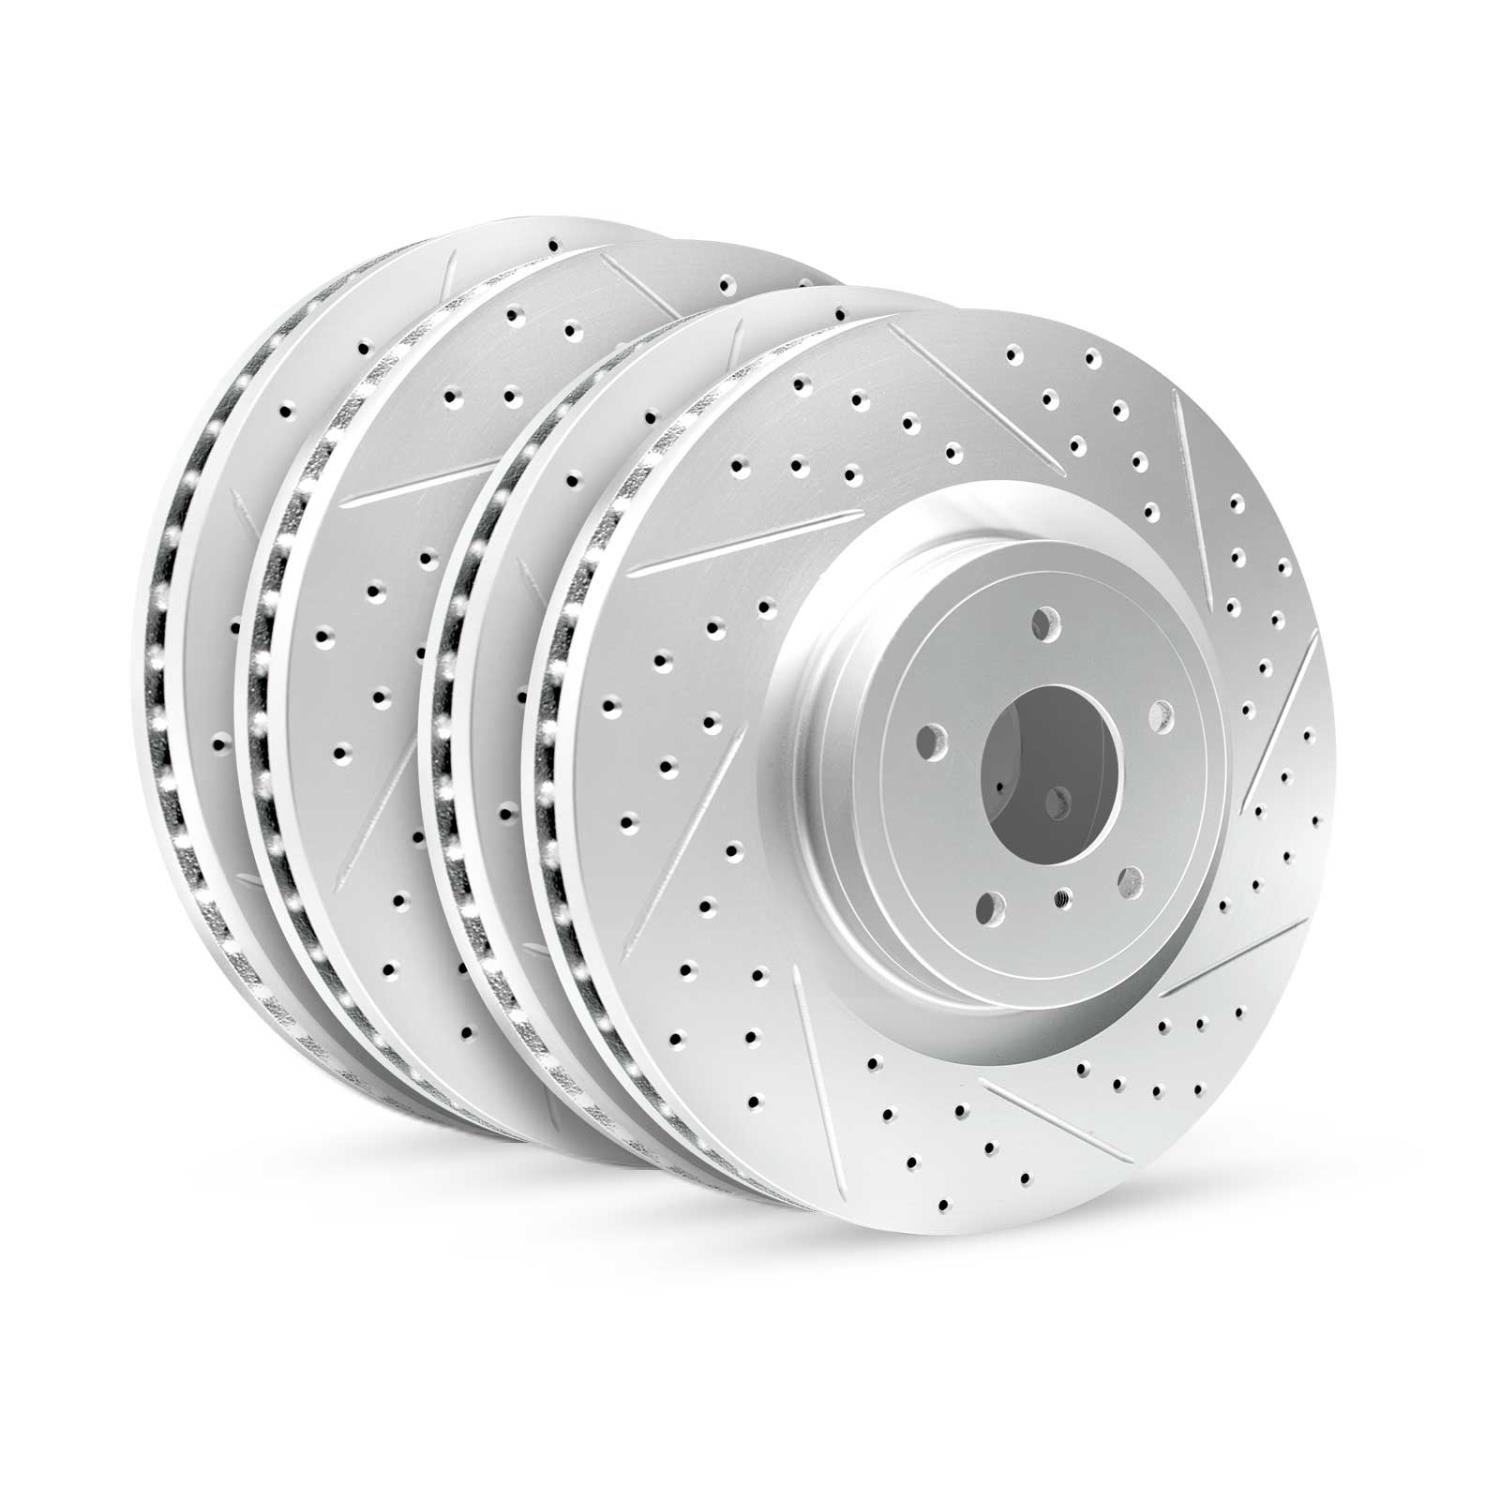 GEO-Carbon Drilled & Slotted Brake Rotor Set, Fits Select Lexus/Toyota/Scion, Position: Front & Rear